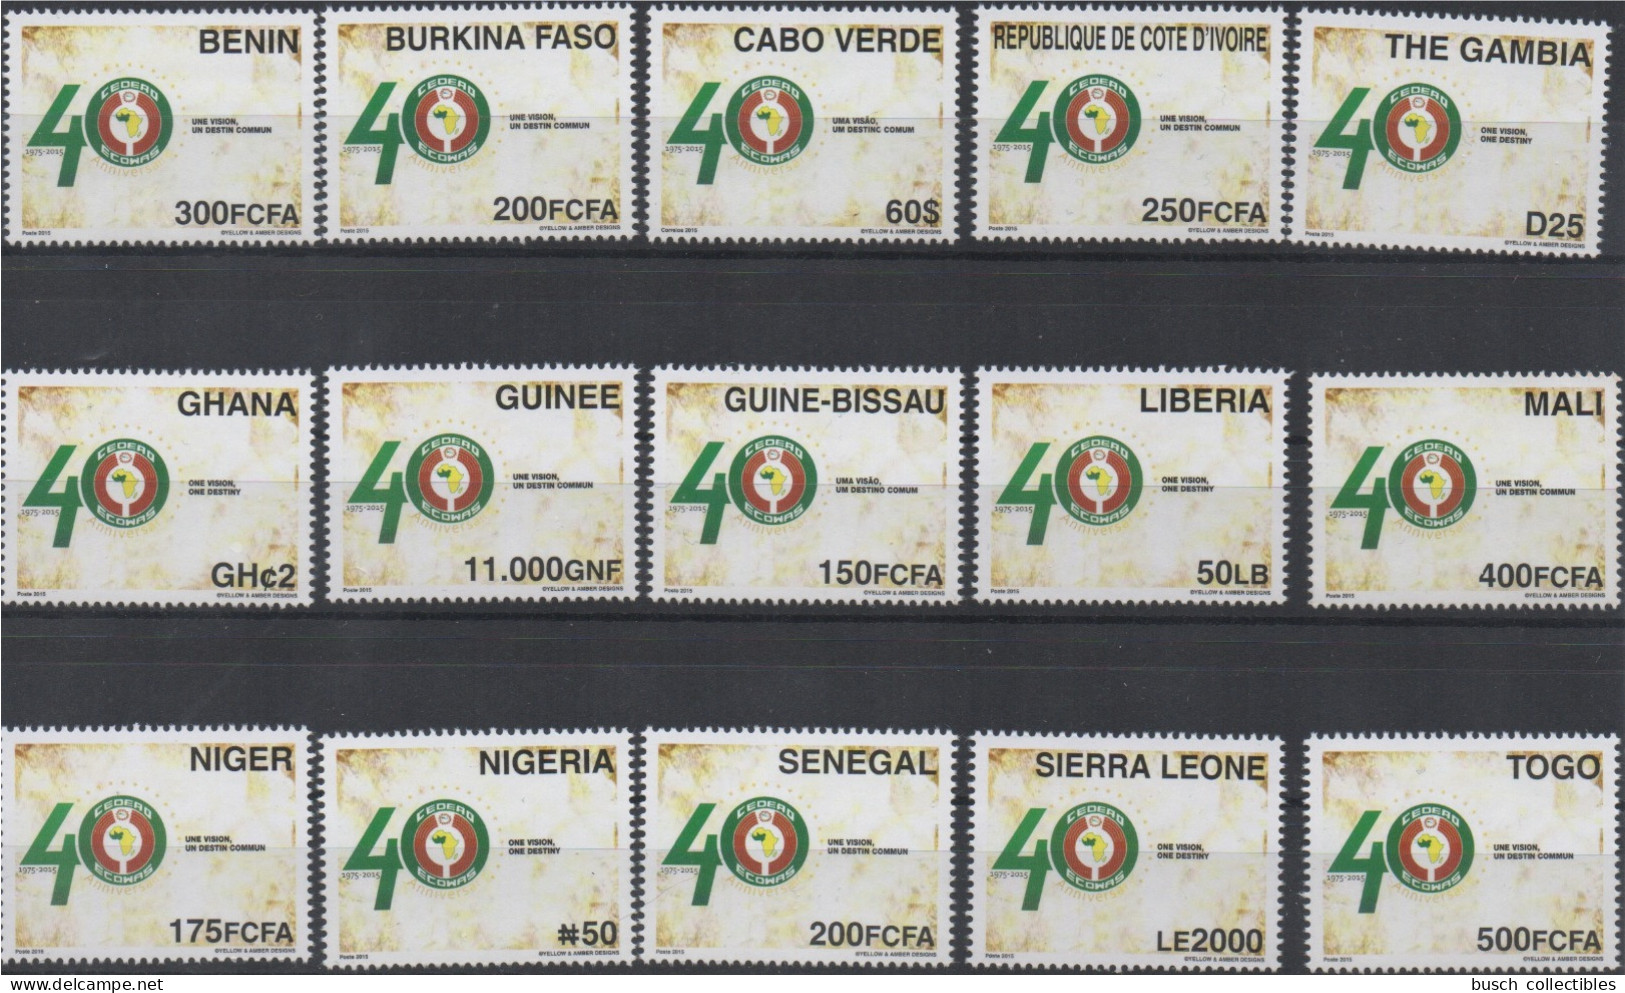 2015 Joint Issue Emission Commune CEDEAO ECOWAS 40 Years ALL 15 Countries MNH Benin Senegal Togo Nigeria Burkina Guine - Guinea-Bissau